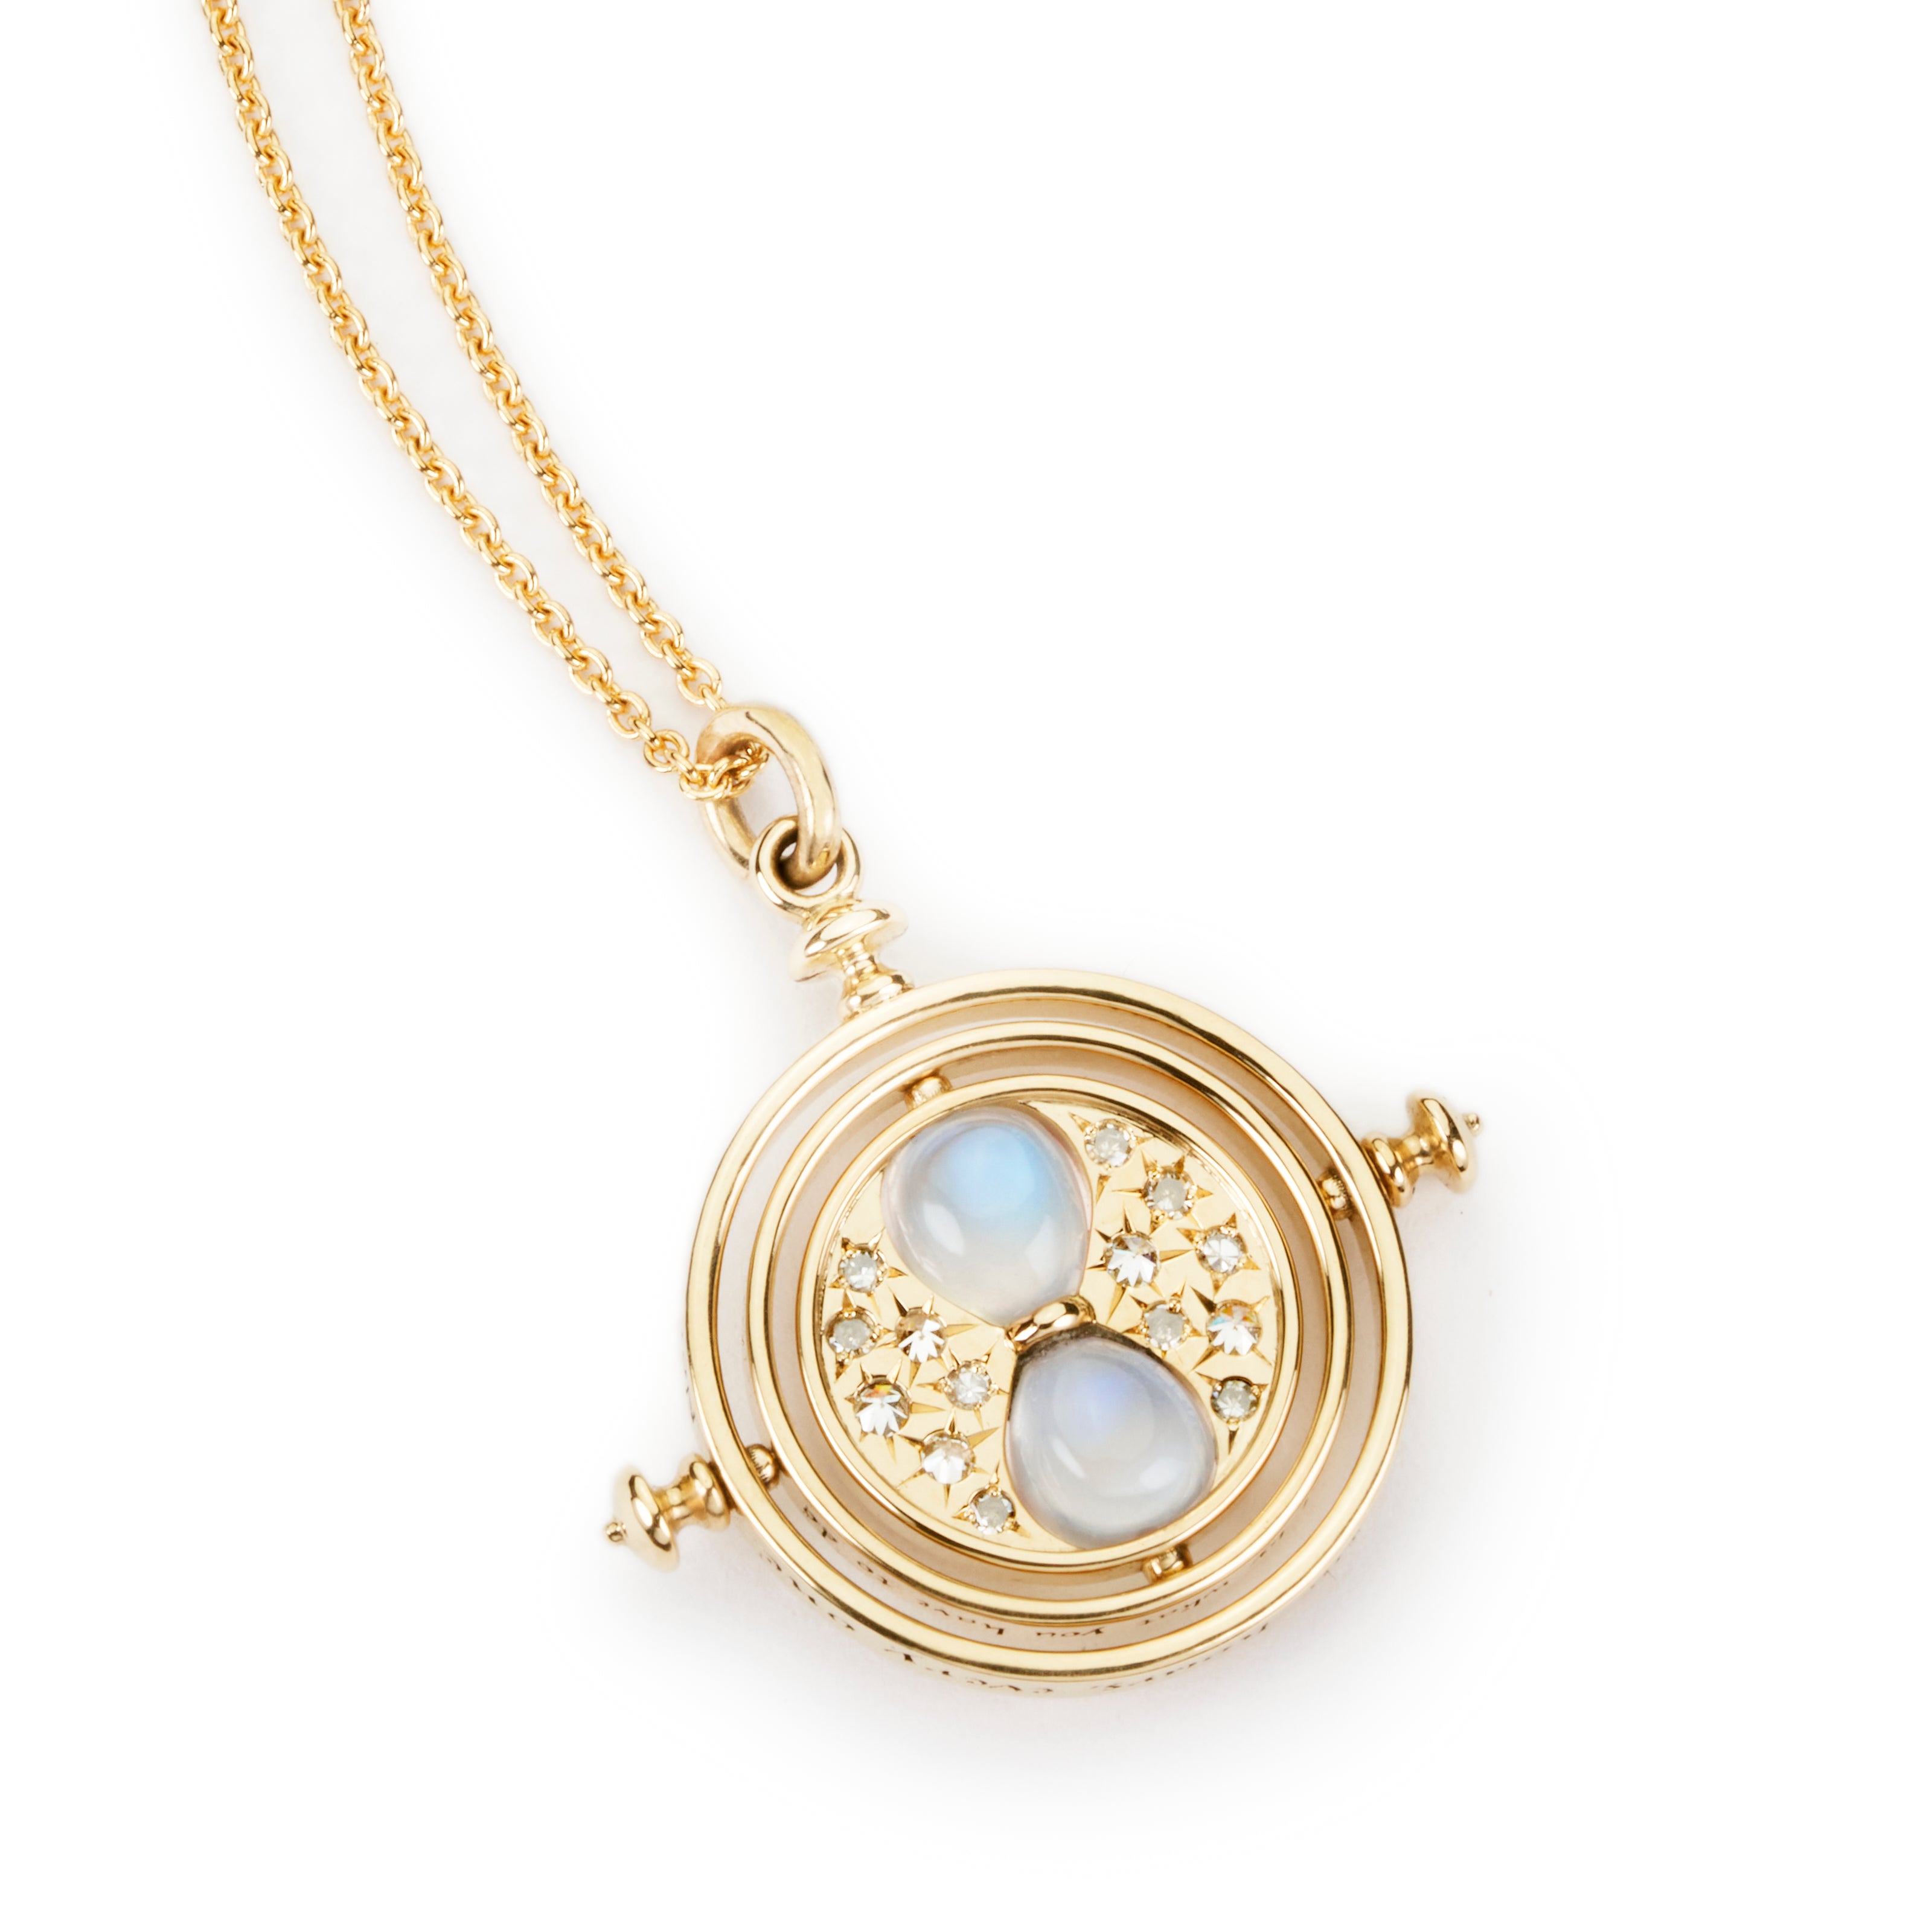 Time Turner Diamond and Moonstone Necklace